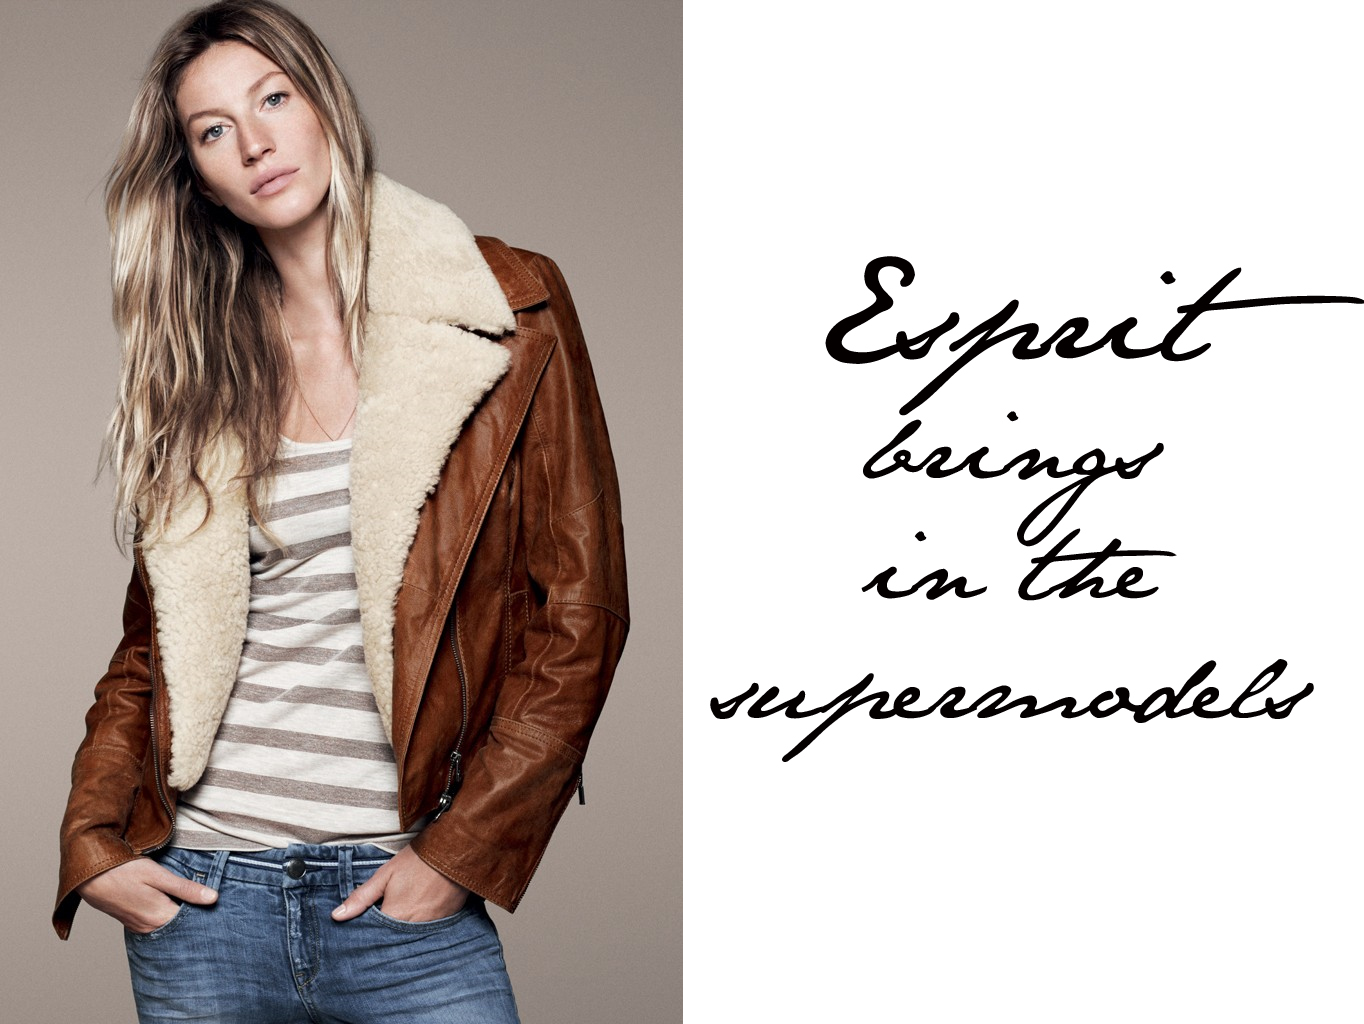 Esprit feature Gisele Bundchen and Erin Wasson in new campaign - Emily ...